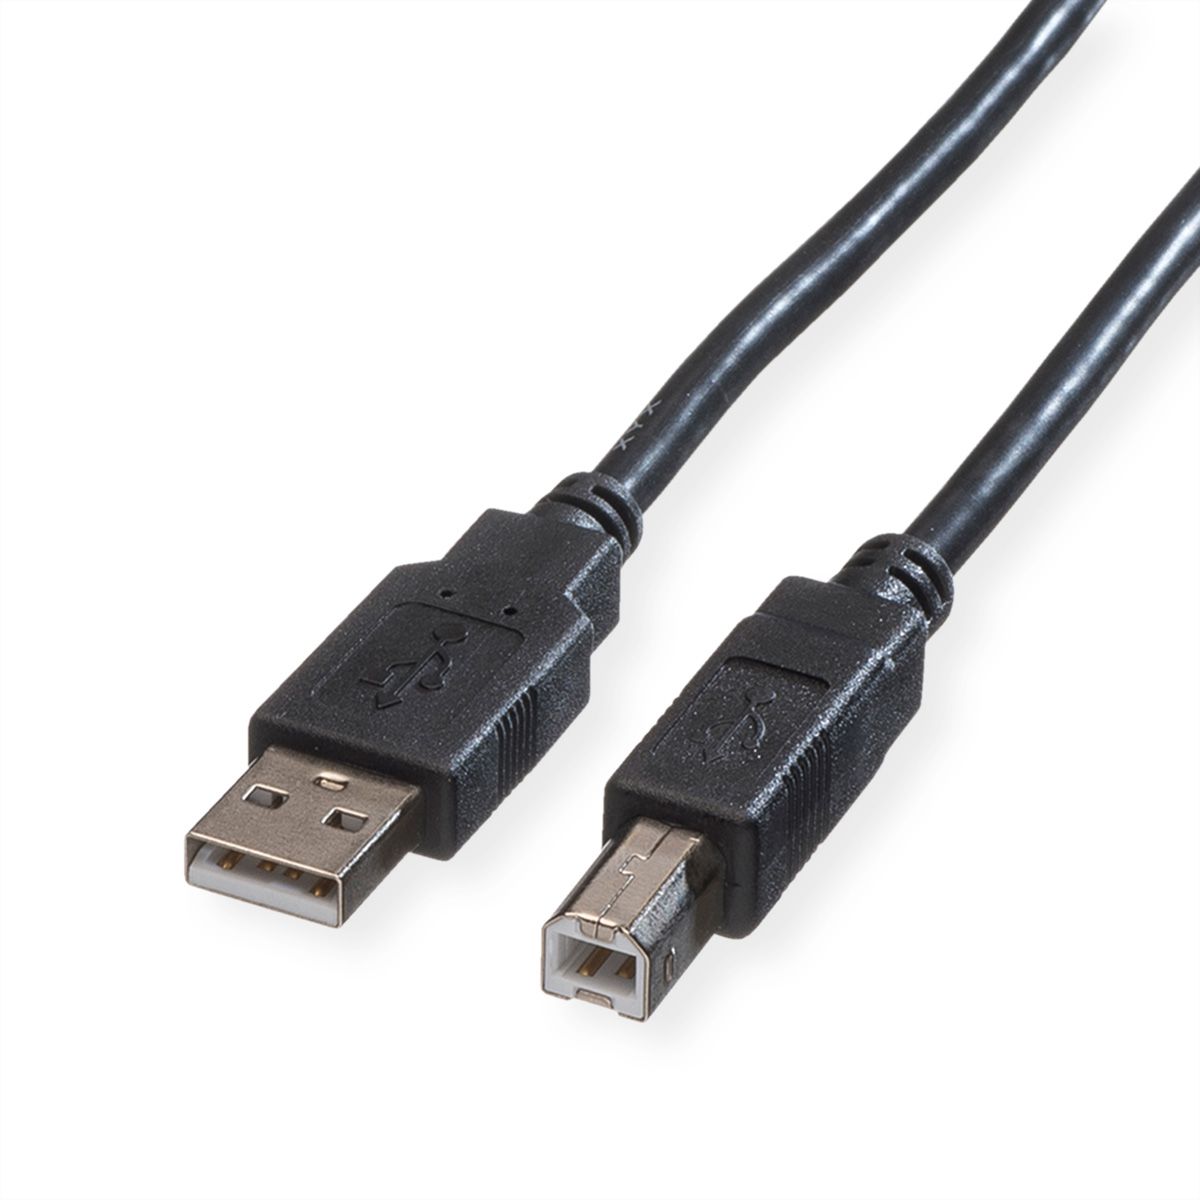 USB Interface USB 2.0 A Male to B Male Extension/Data Transfer/Printer Cable 4.5m. Length 